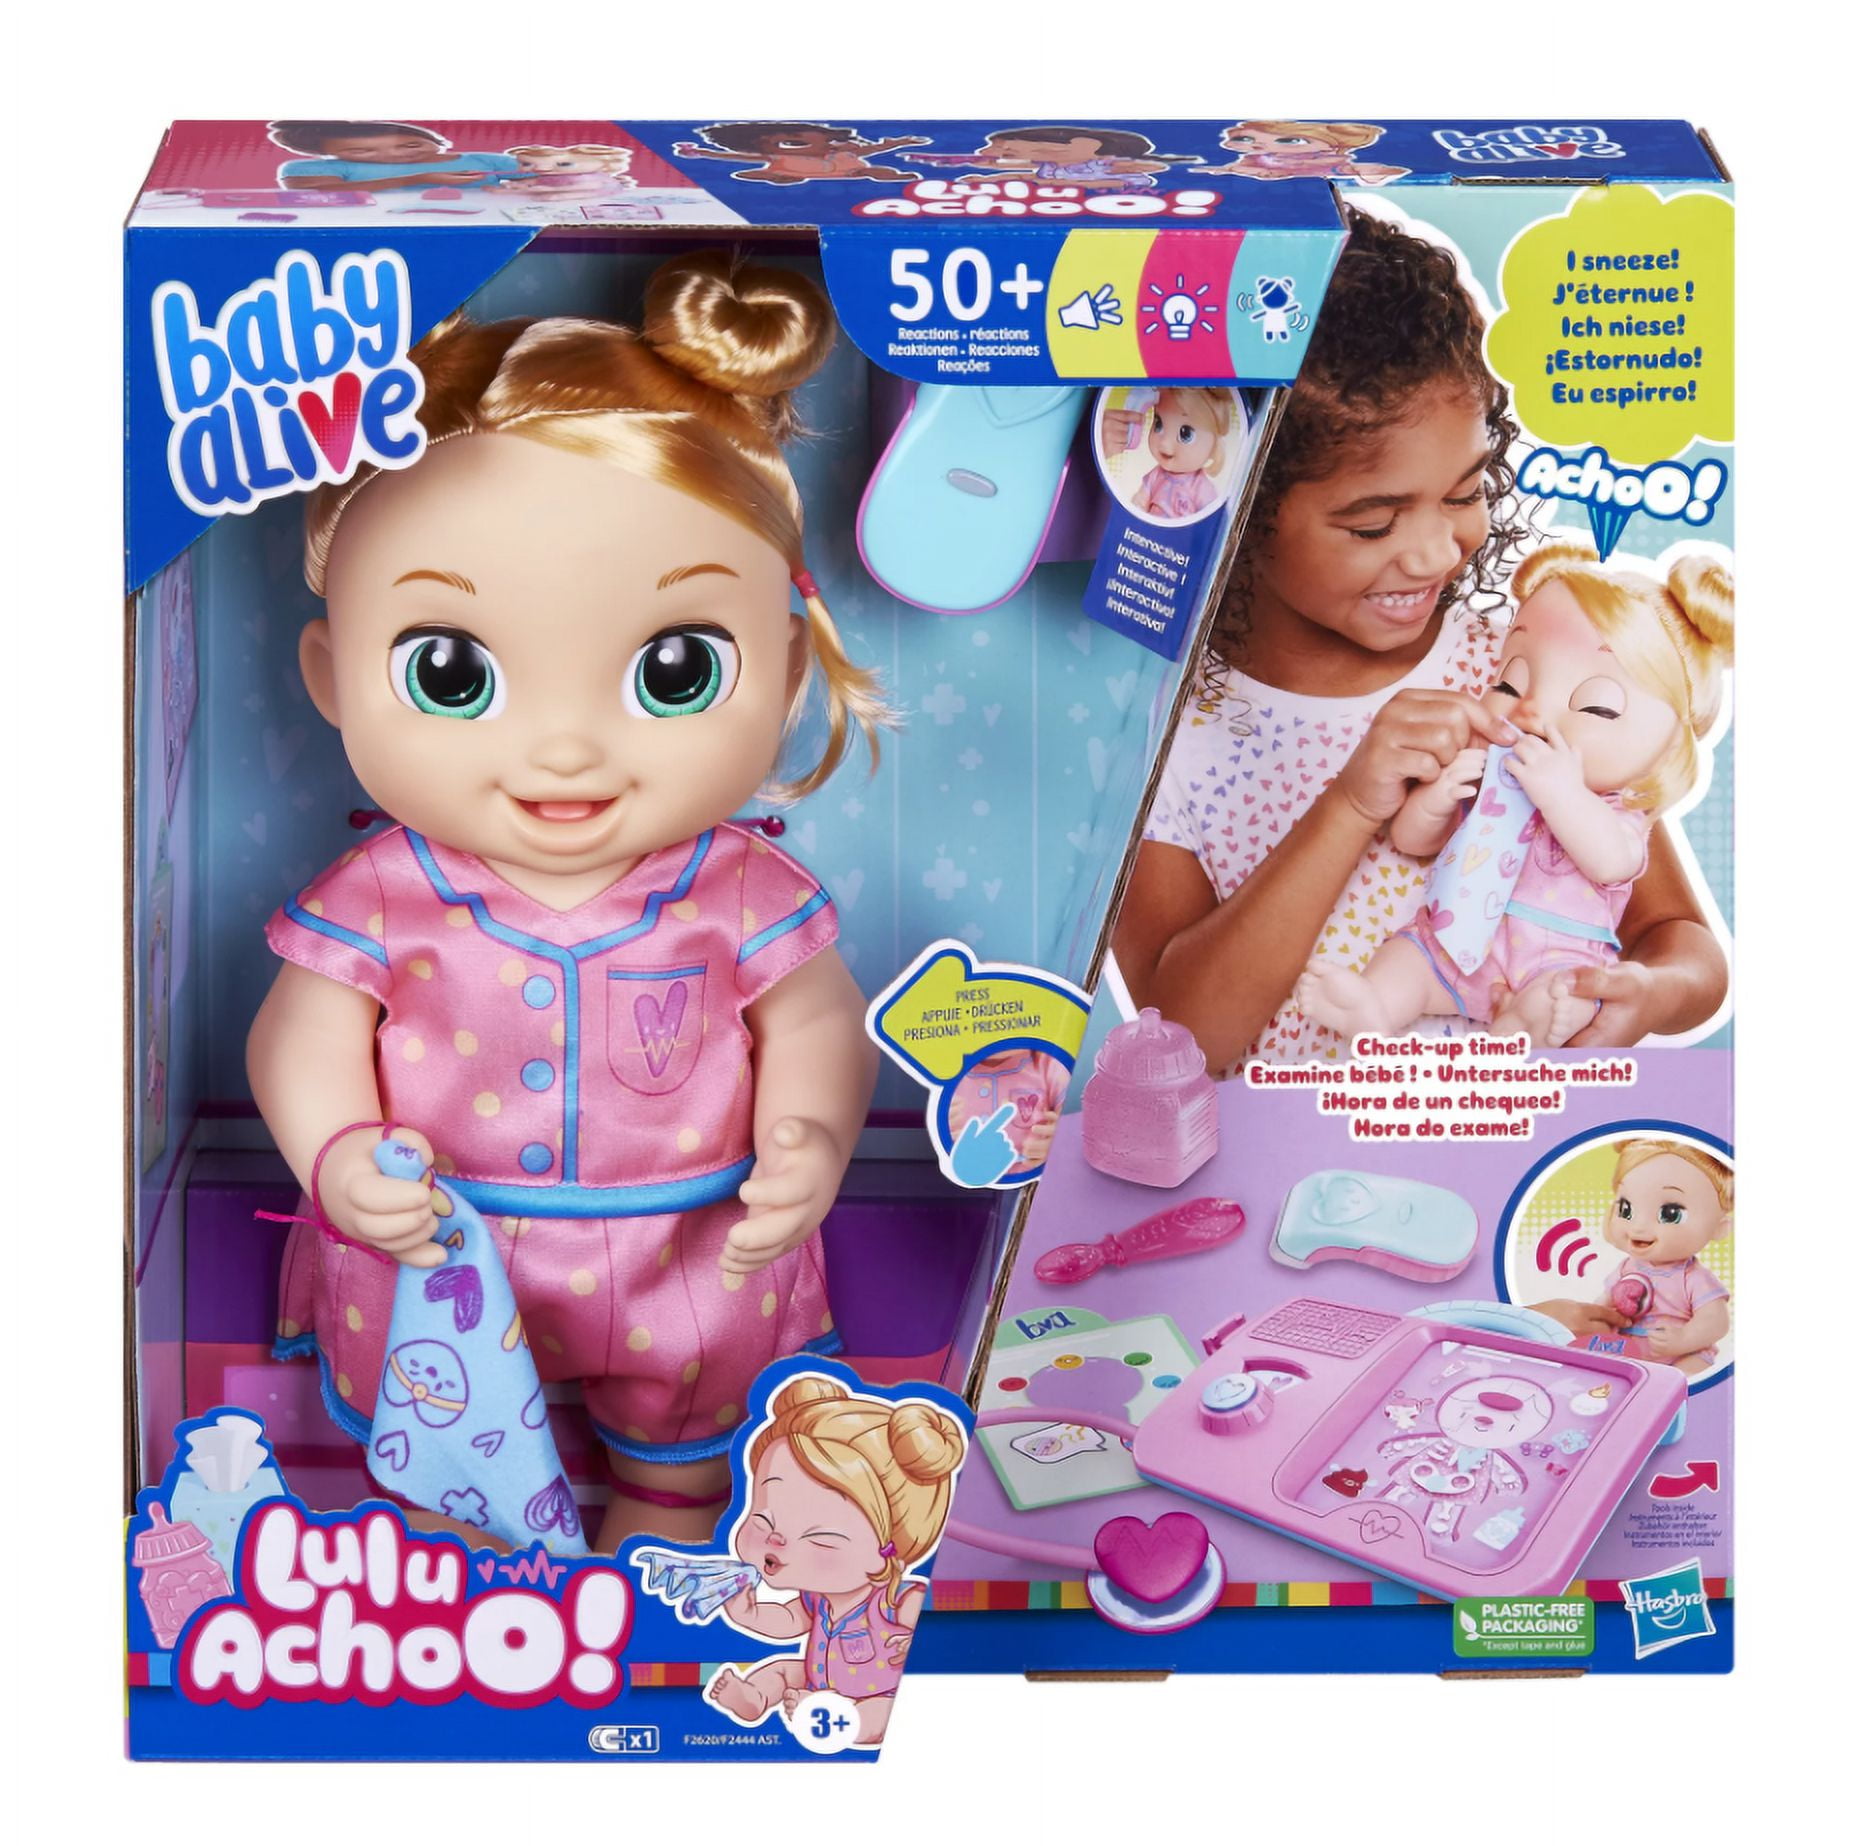 Baby Alive Sudsy Styling Doll, Includes Baby Doll Salon Chair, Accessories,  Bubble Solution, Blonde Hair - Walmart.ca